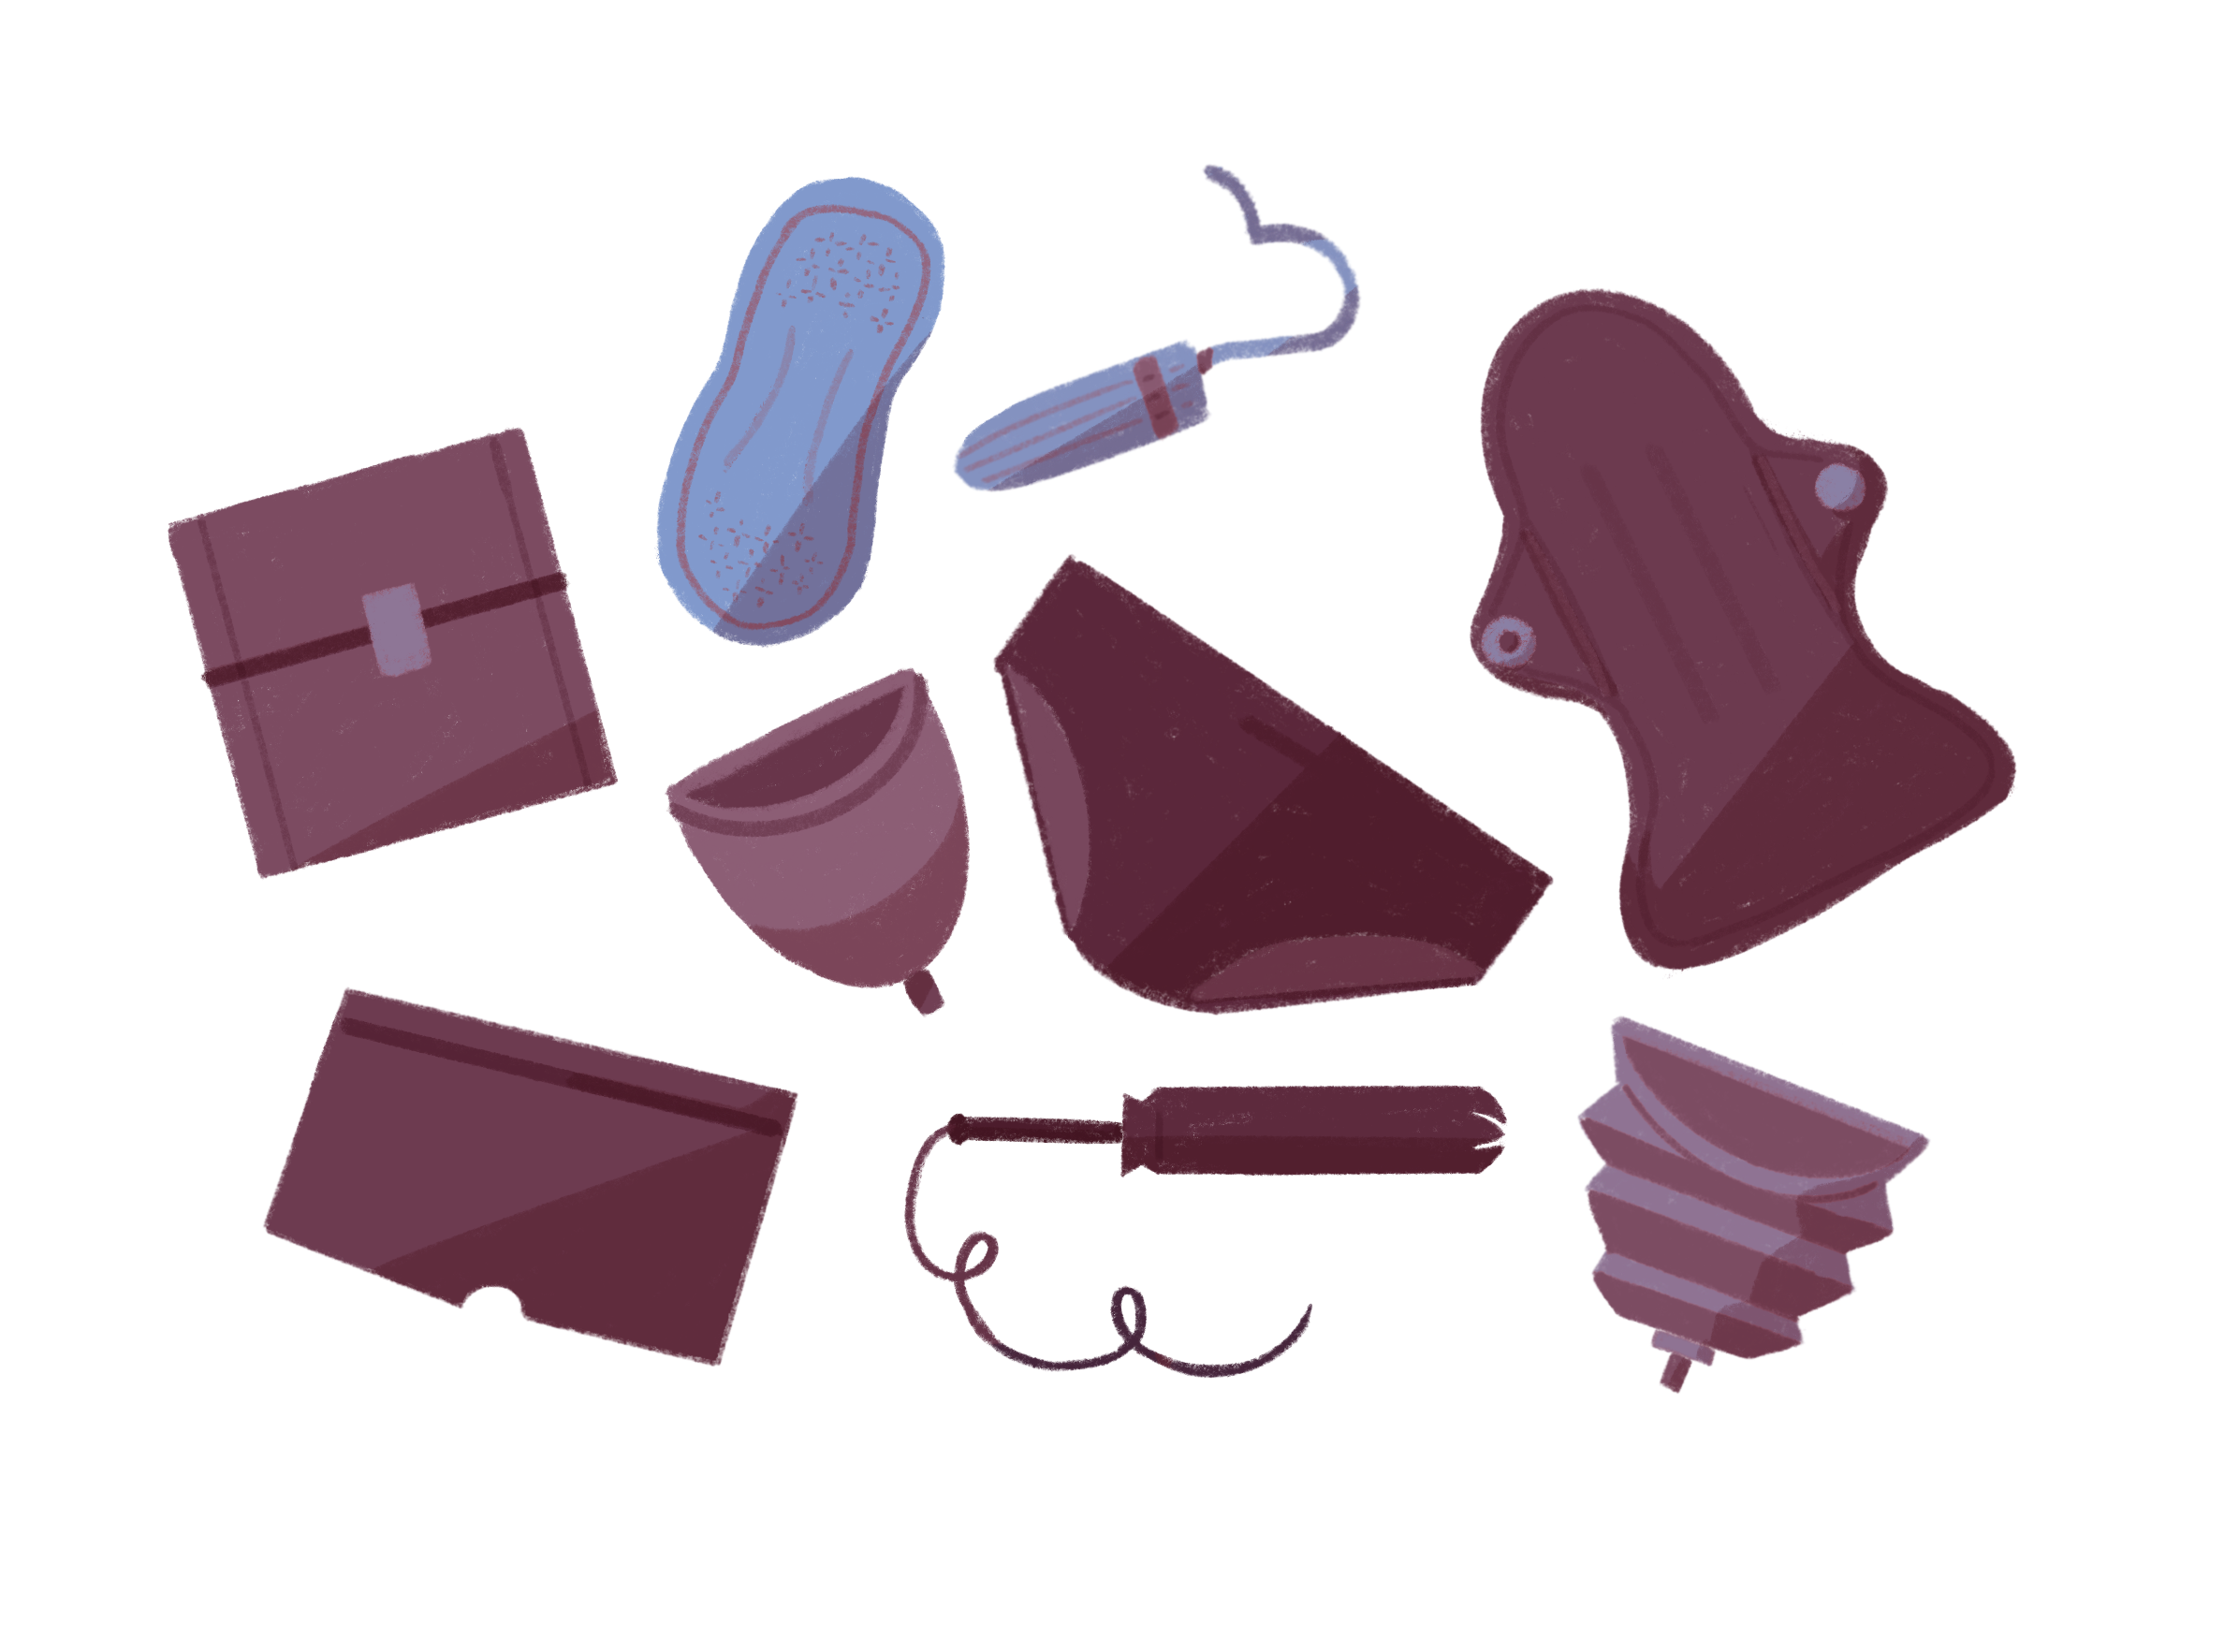 Illustration of various menstrual products, such as tampons, pads, and cups